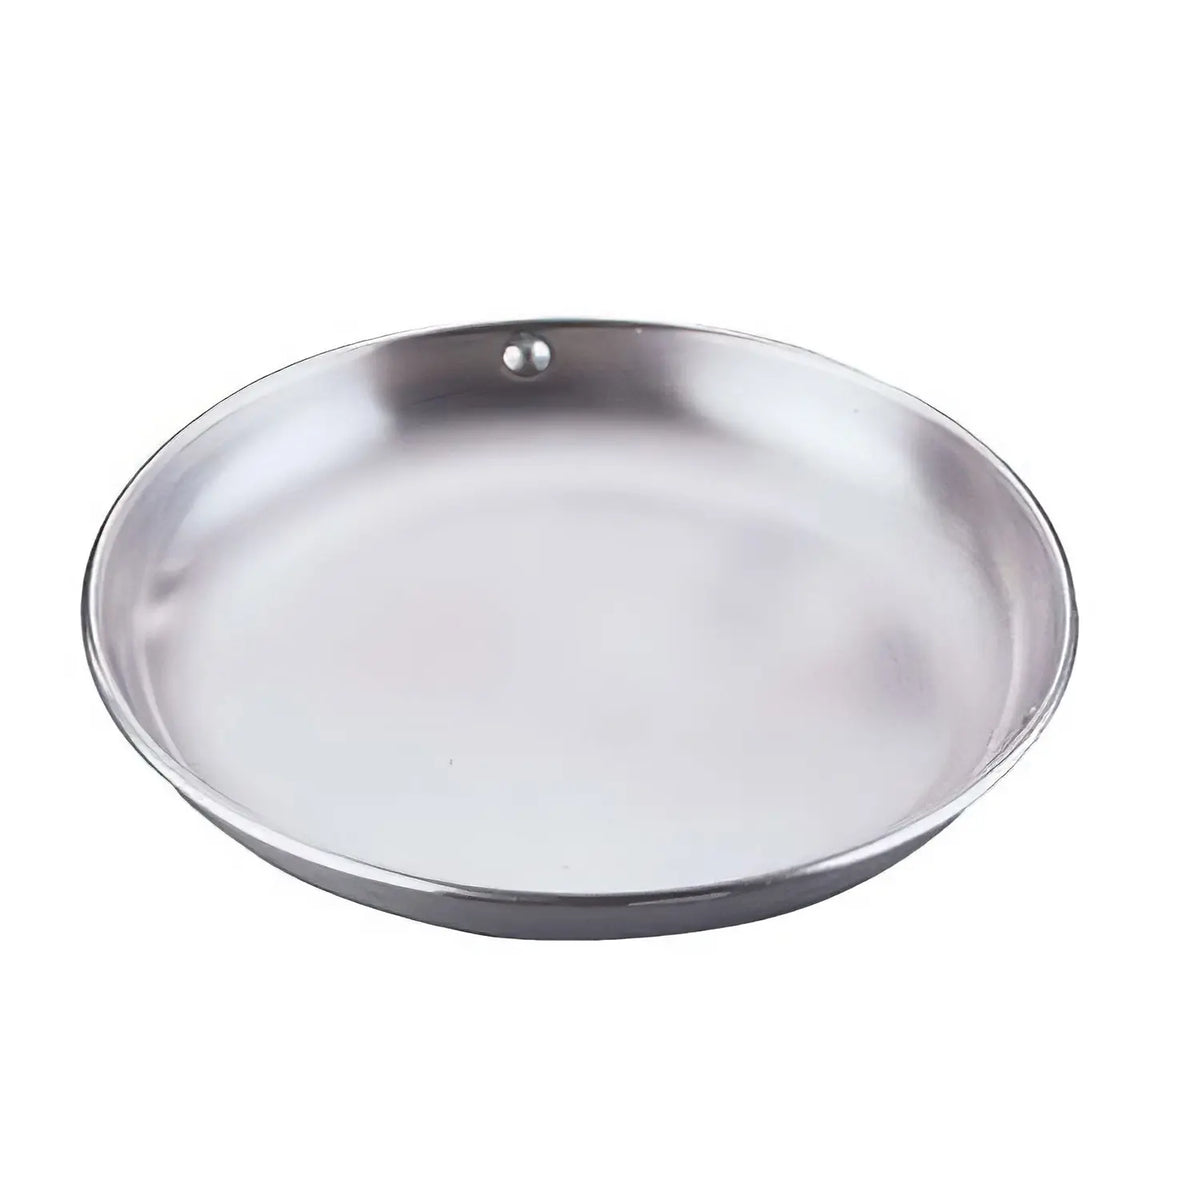 IKD ecoclean Stainless Steel Lunch Plate